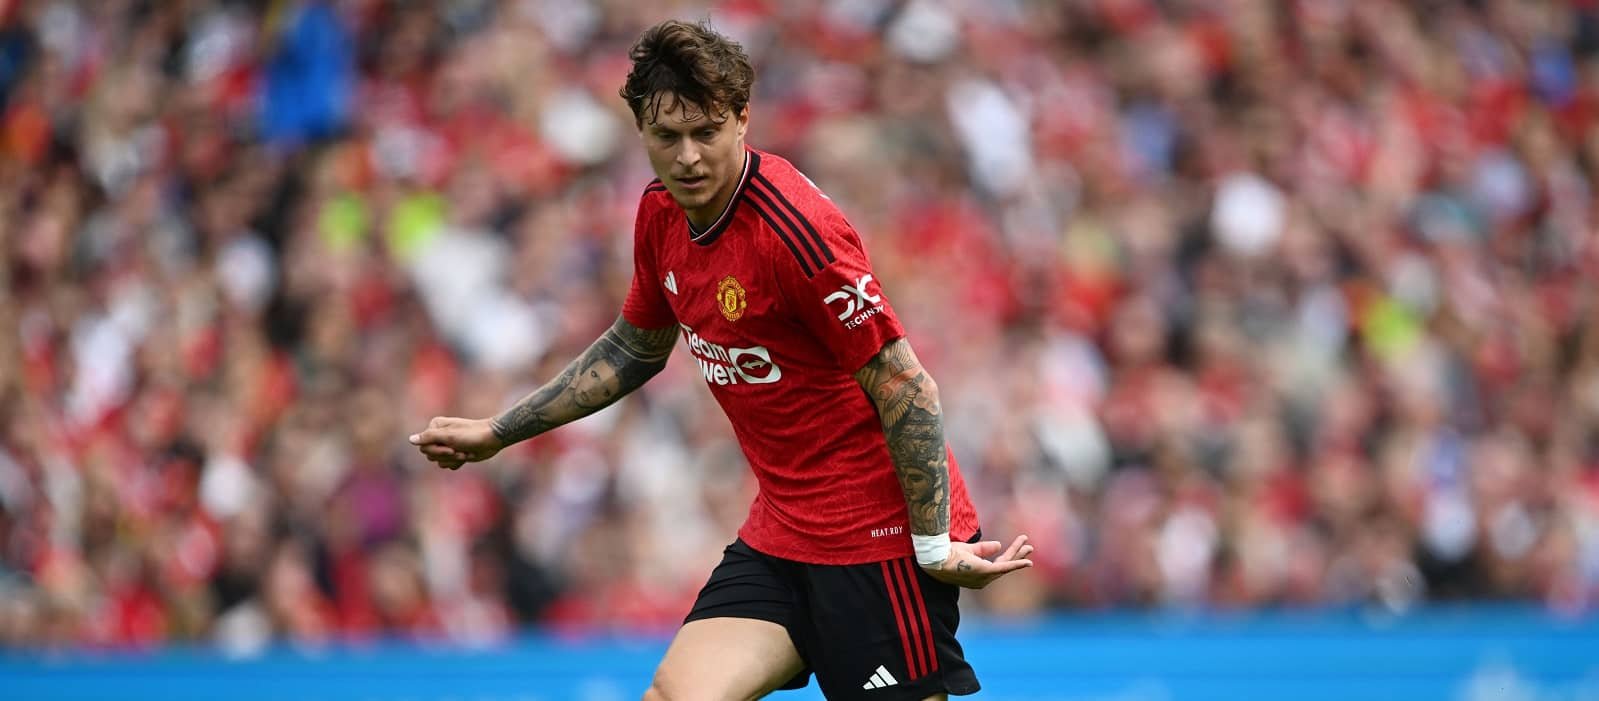 Wife of Manchester United’s Victor Lindelof opens up on life at Old Trafford – Man United News And Transfer News